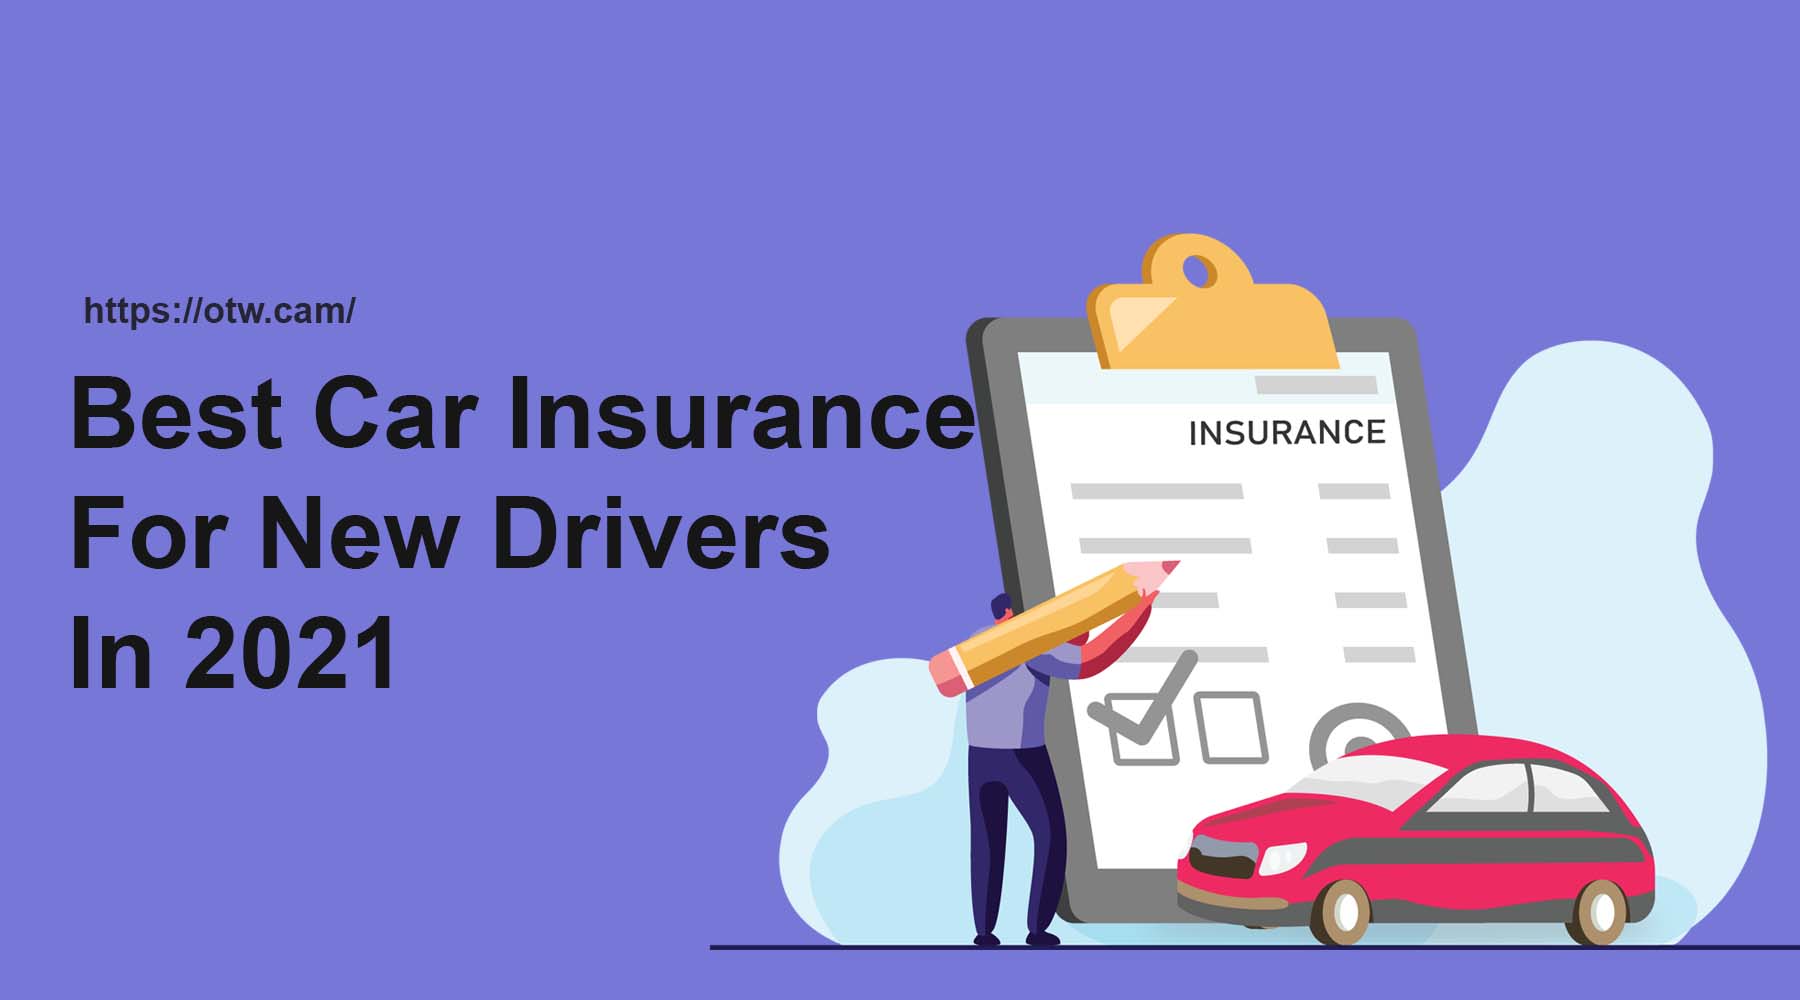 Best Car Insurance Recommendations For New Drivers In 2021